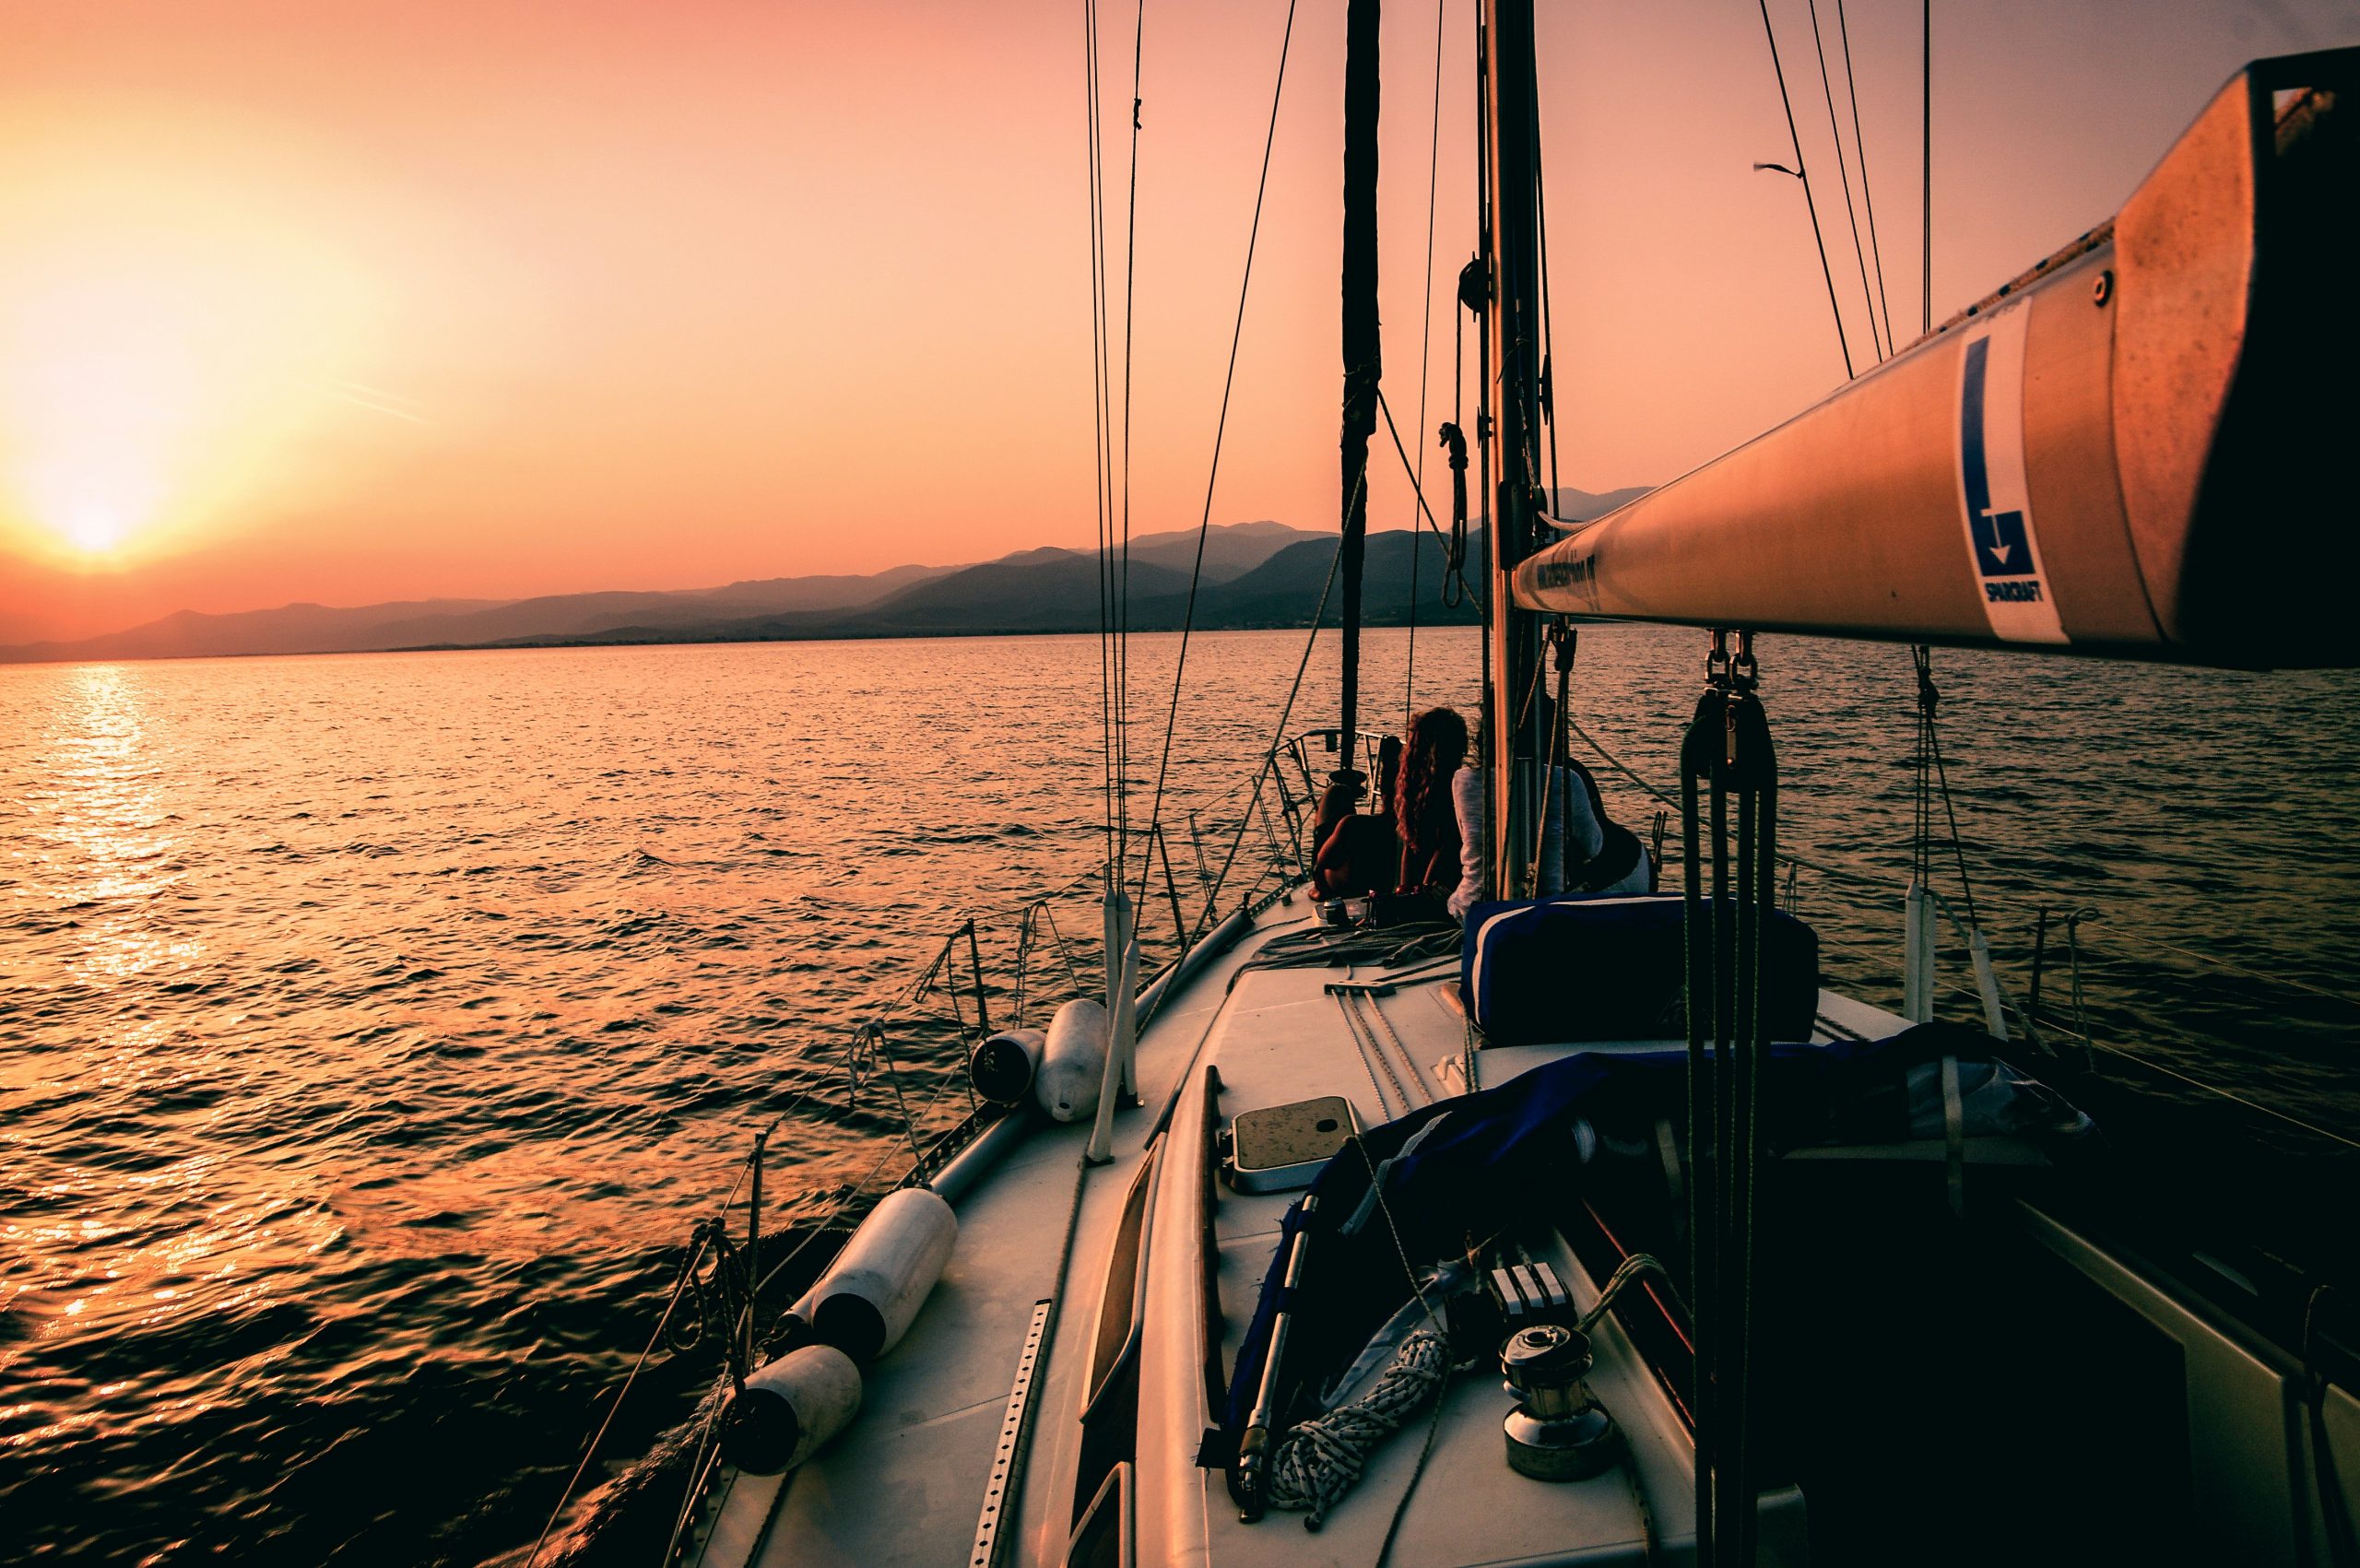 sailing - explore the beauty of the open sea and experience the freedom of the wind as you sail across the water to new horizons.